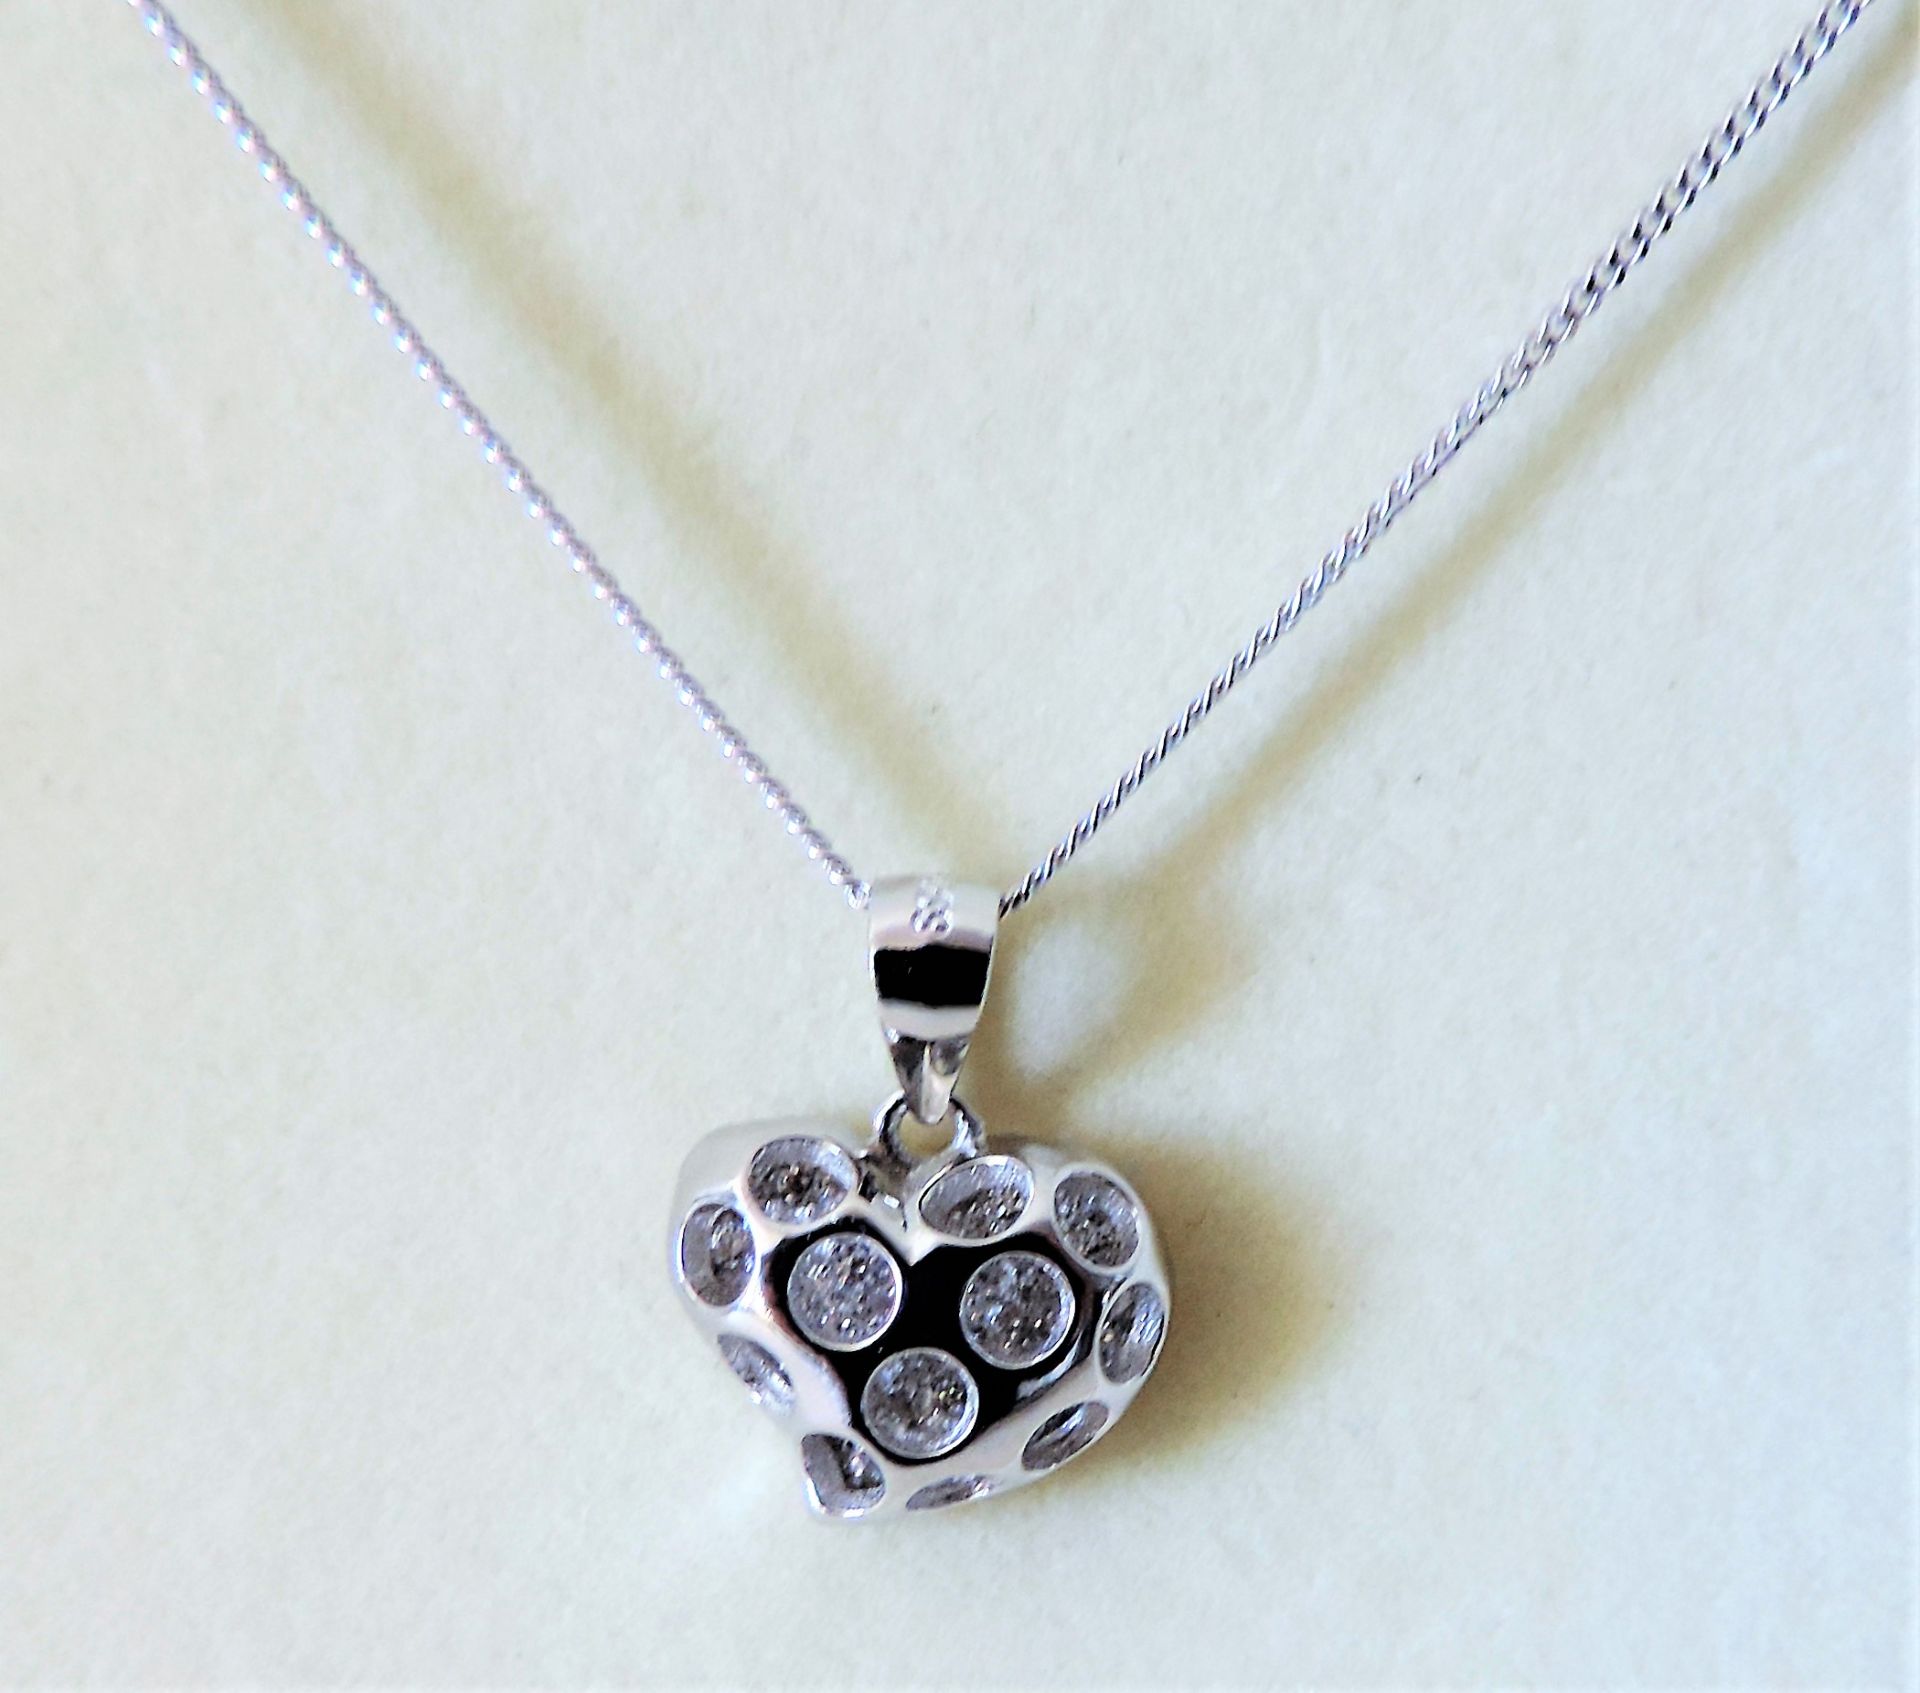 Rhodium Plated Sterling Silver Cubic Zirconia Pendant Necklace - Image 2 of 3